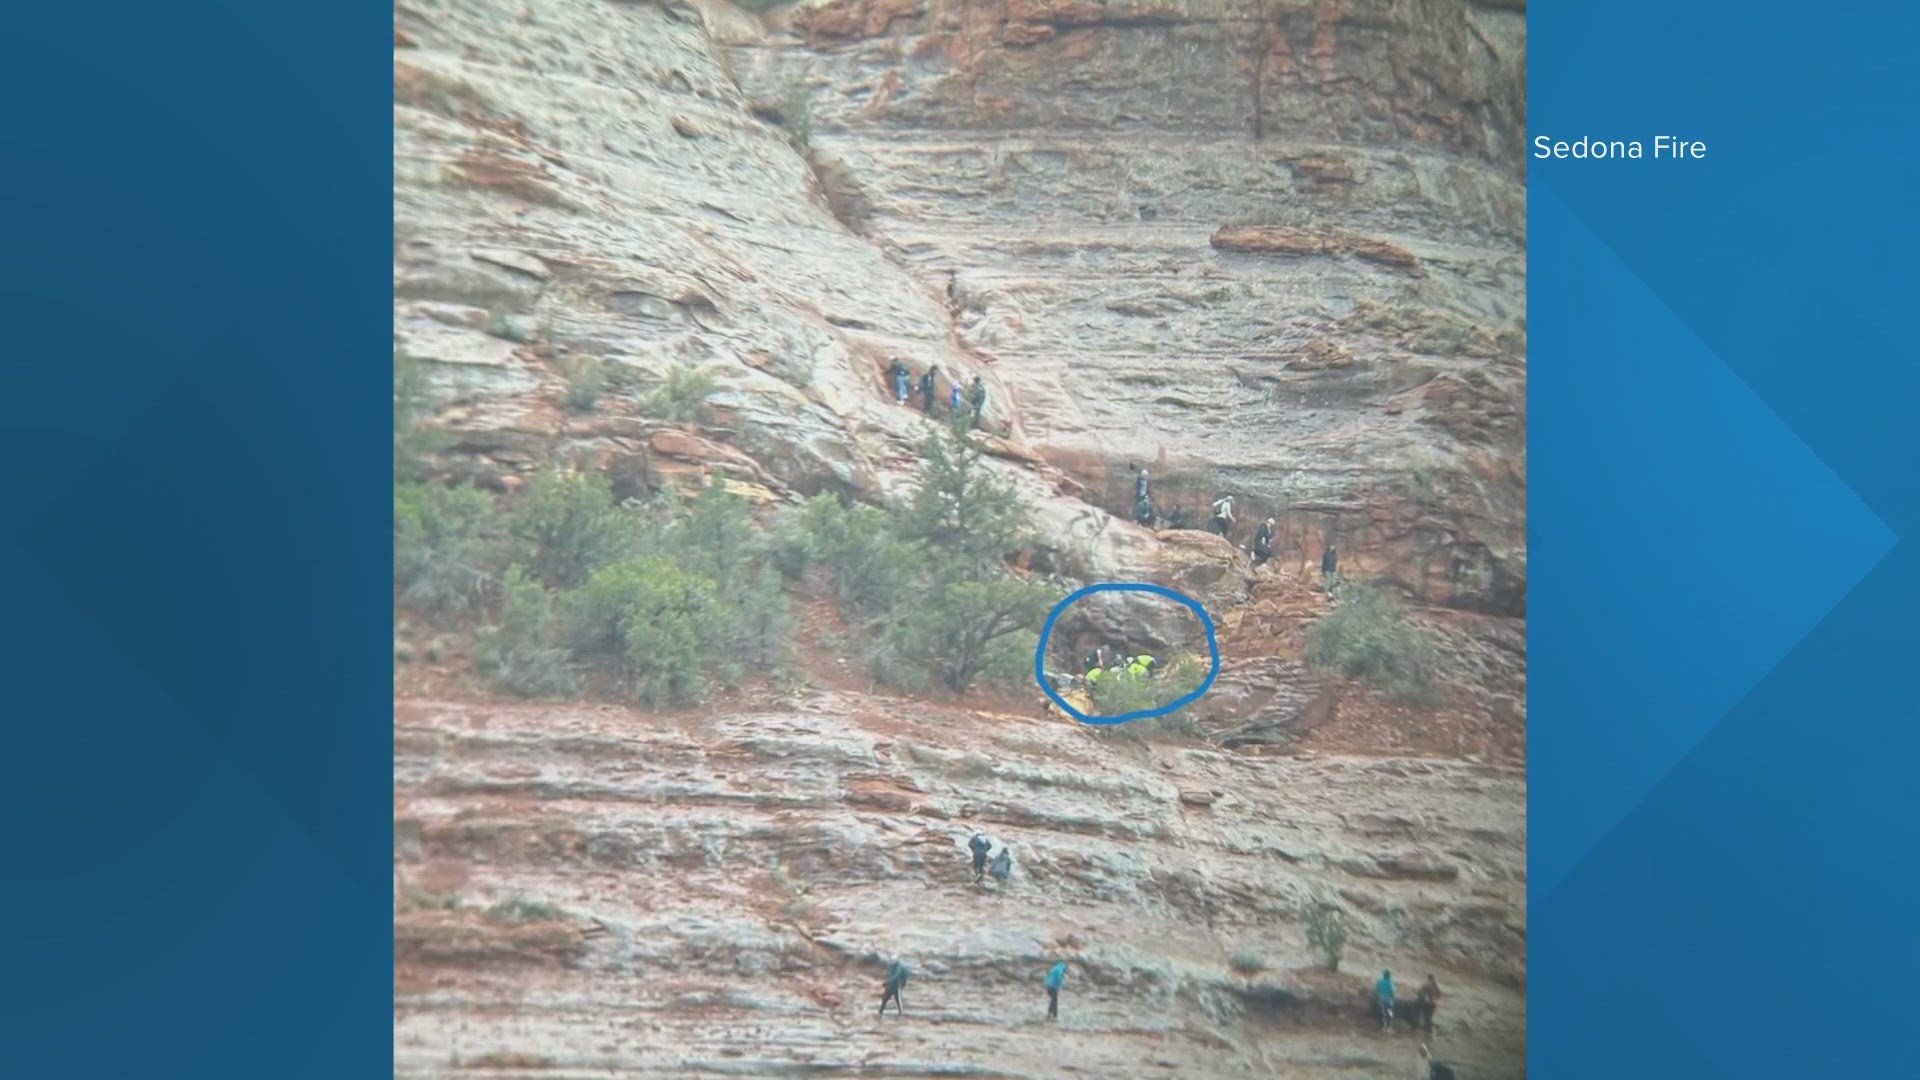 The woman was hurt after a long fall on the Cathedral Rock trail in Sedona and the city's fire department is offering tips to help keep hikers safe.